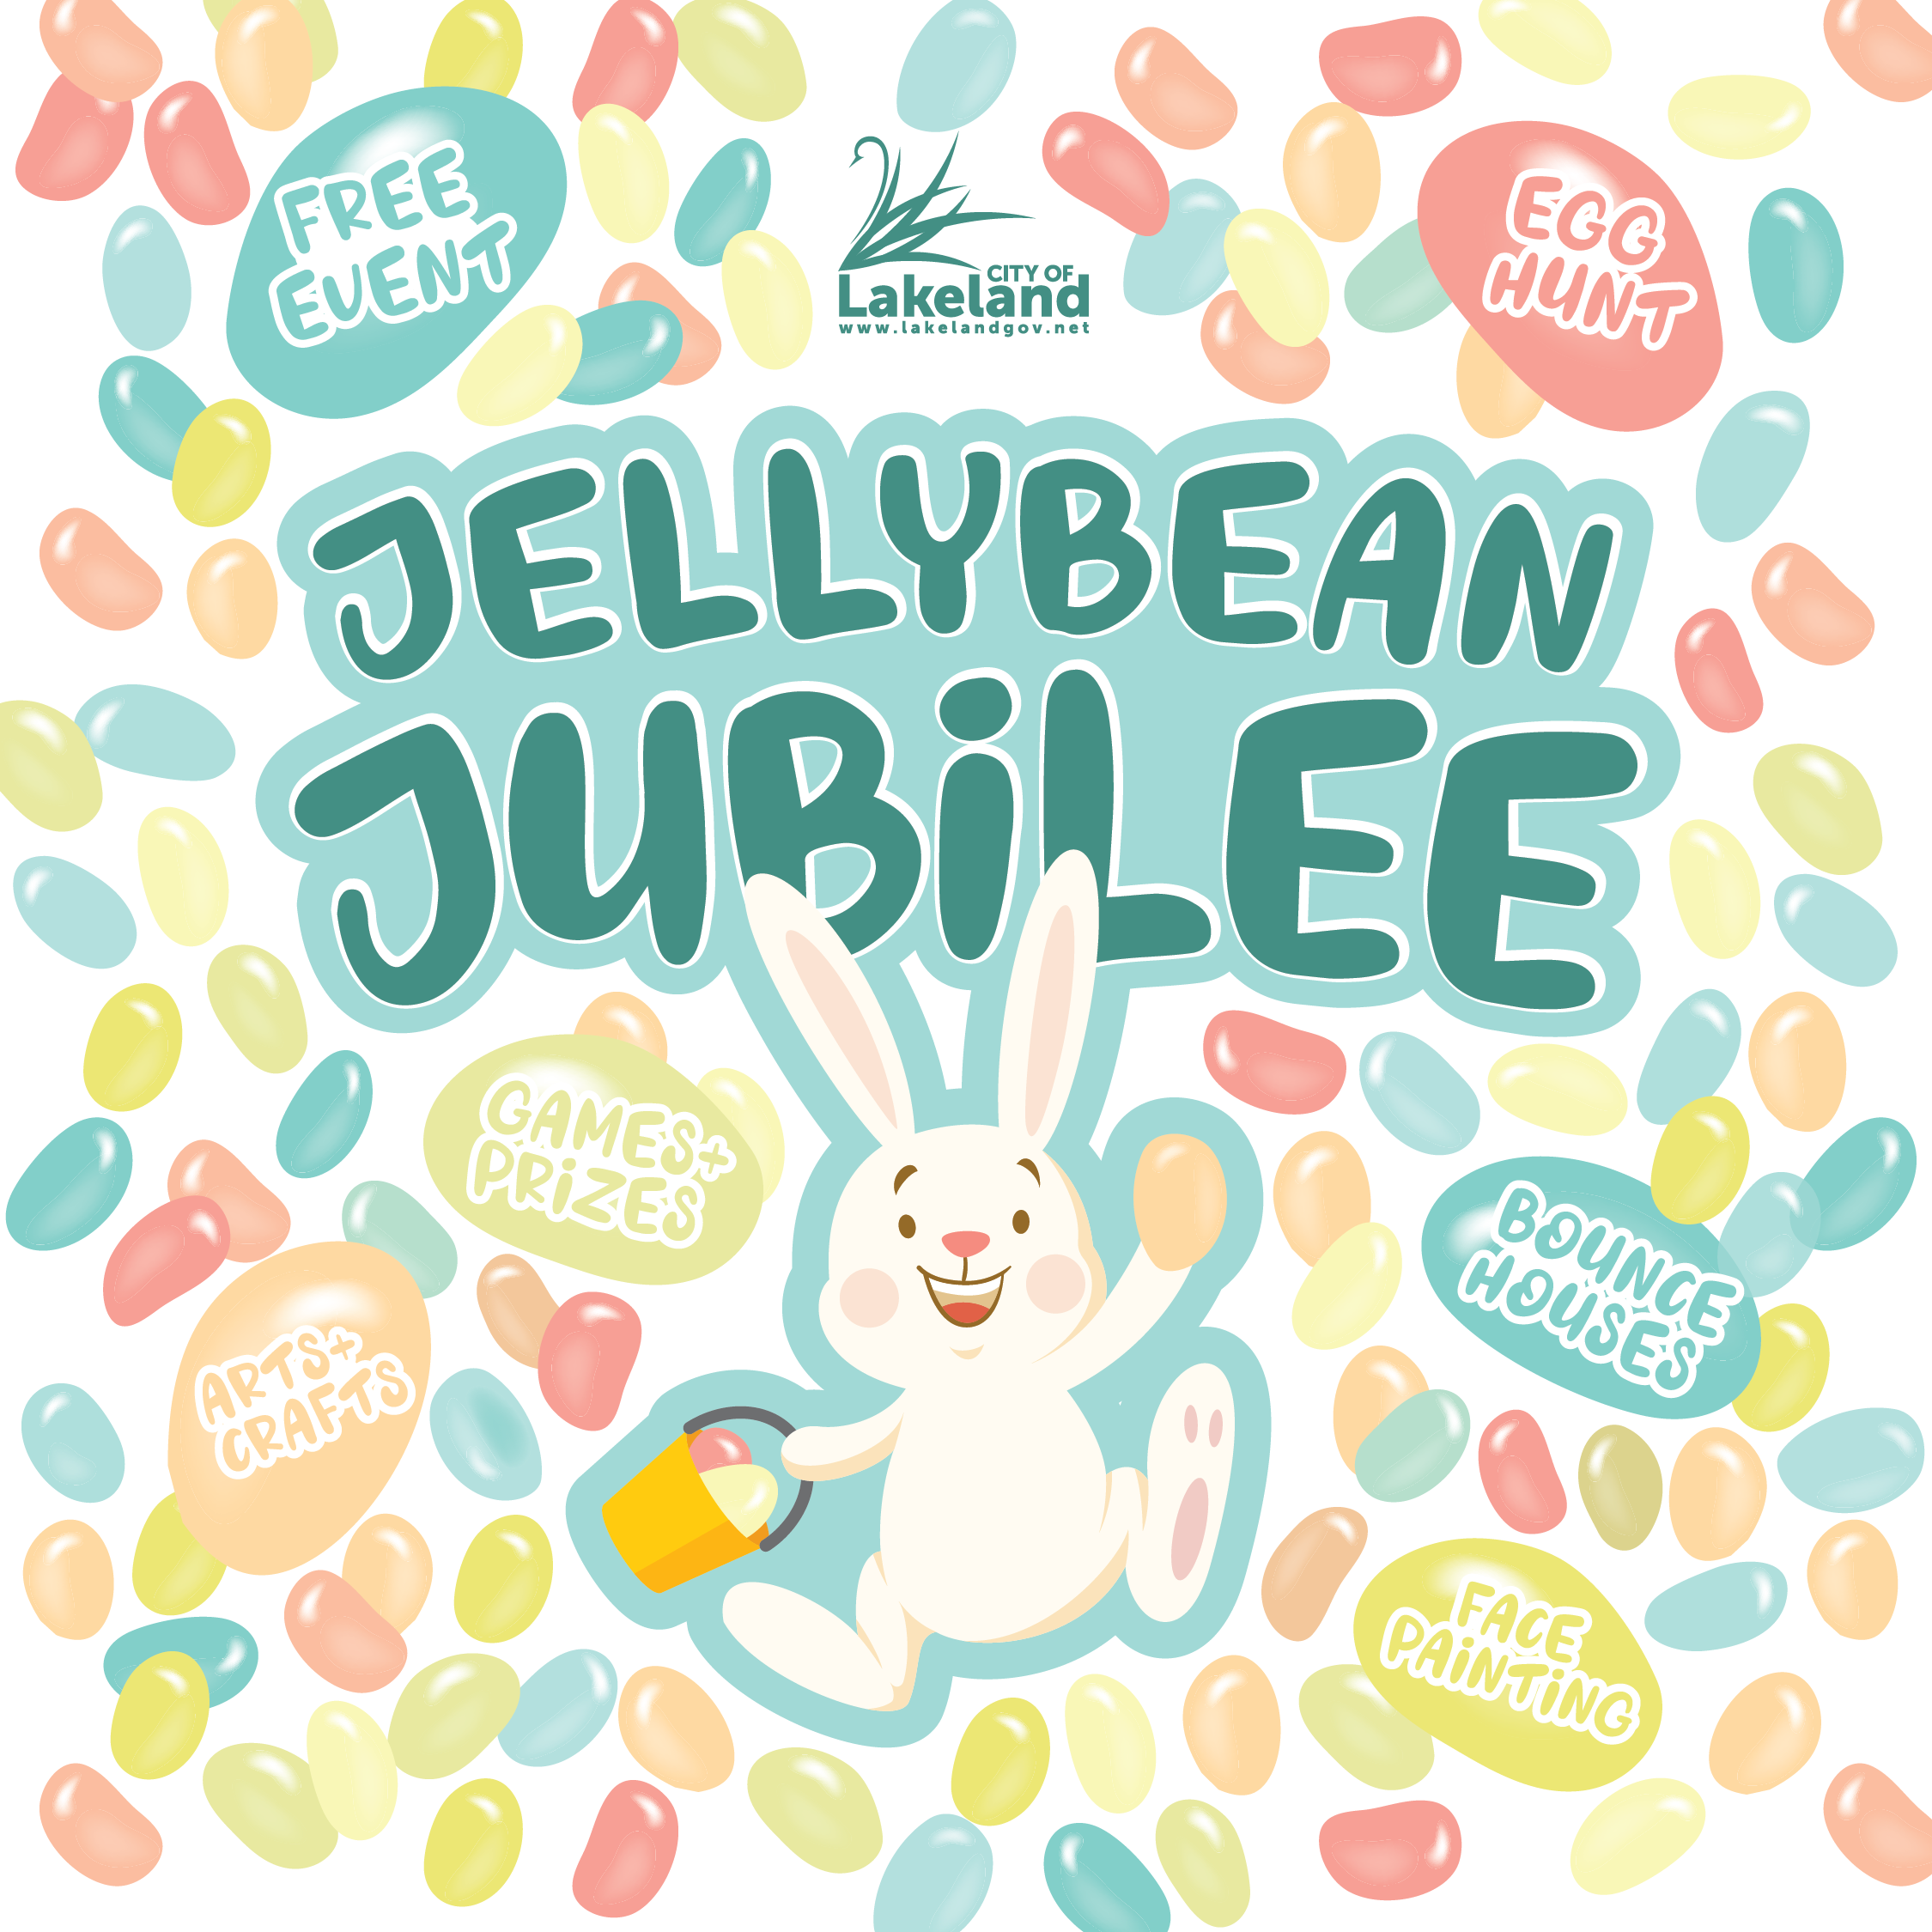 Jelly Bean Jubilee Event image - all info in event page